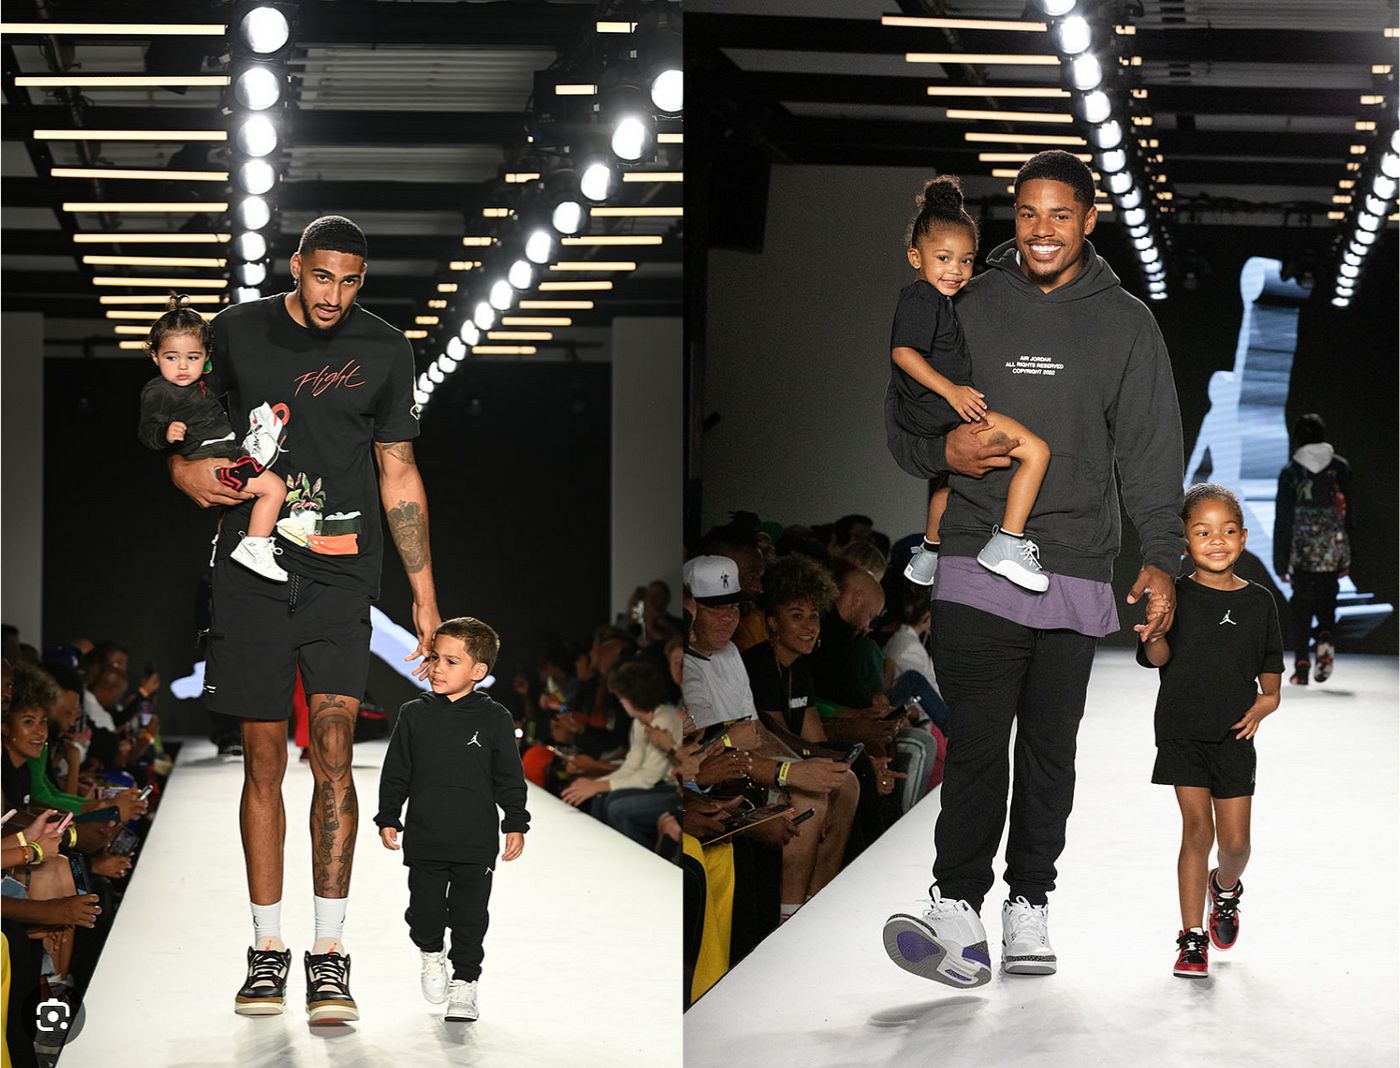 new-york-stars-sterling-shepard-and-julius-randle-shine-at-fashion-show-with-their-kids